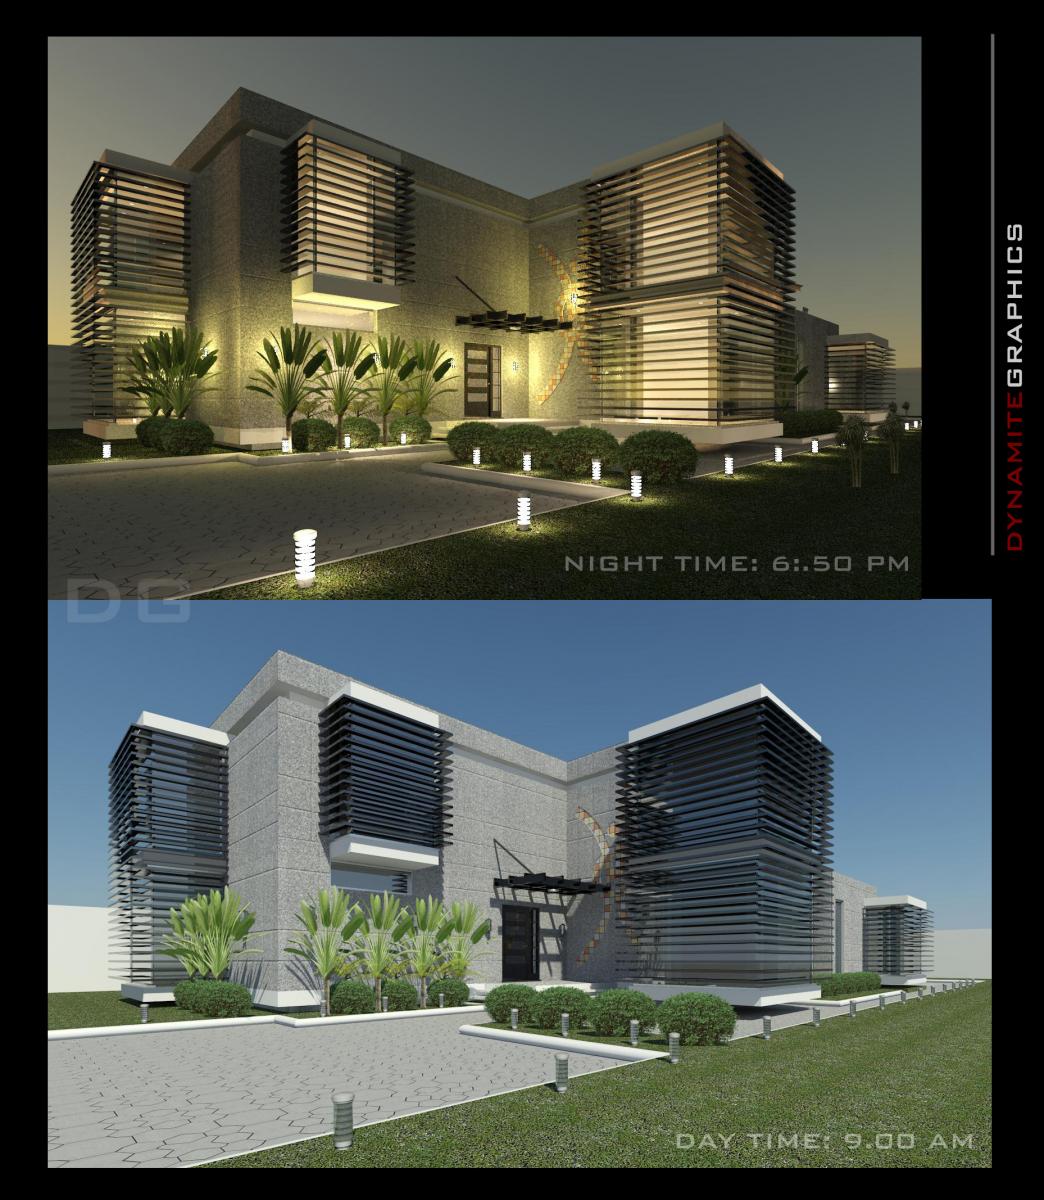 MODERN RESIDENCE NIGHT AND DAY